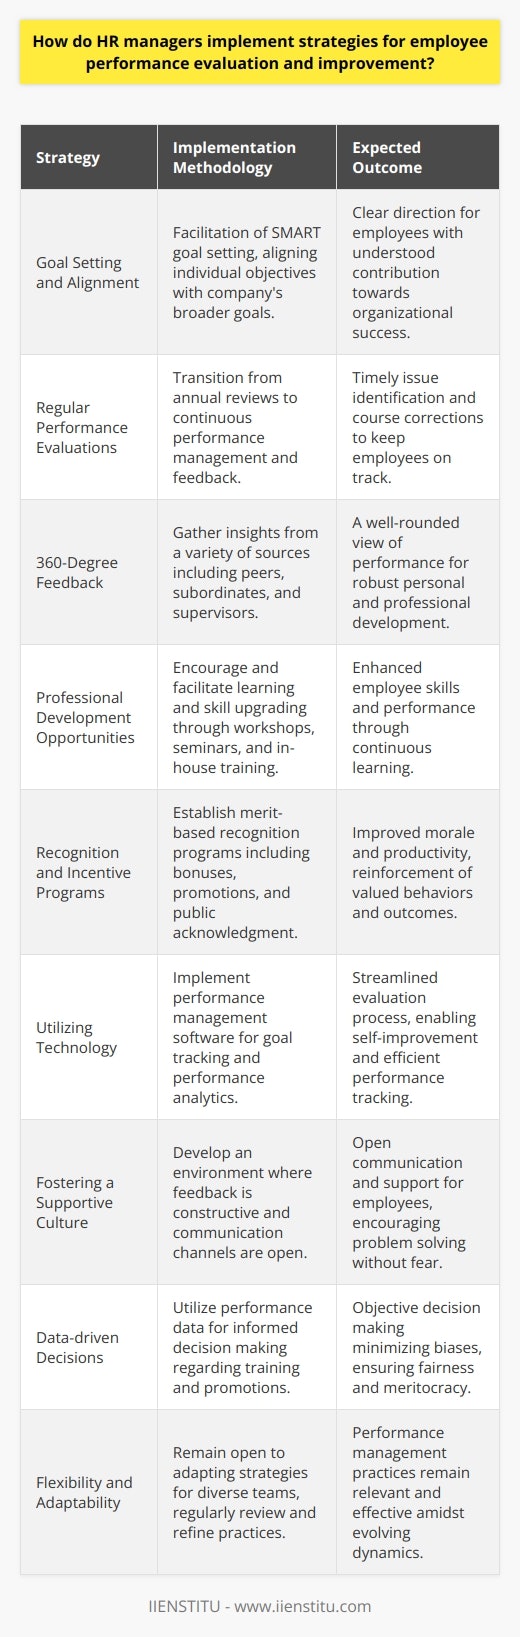 Human Resource (HR) managers play a pivotal role in the enhancement of employee performance within an organization. To effectively evaluate and improve employee performance, they deploy a variety of proven strategies that resonate with both the organizational goals and its workforce's unique characteristics. Here are the key strategies and their implementation methodologies:**Goal Setting and Alignment**It all begins with clearly defined expectations. HR managers facilitate the setting of Specific, Measurable, Achievable, Relevant, and Time-bound (SMART) goals, ensuring that these are well-communicated and aligned with the company's broader objectives. Every team and individual employee should understand how their work contributes to the organization’s success.**Regular Performance Evaluations**Regular performance appraisals are vital. However, the traditional annual review is no longer sufficient. Many HR professionals are pivoting towards continuous performance management where employees are evaluated and provided with feedback more frequently. This approach allows for timely identification of issues and course corrections, keeping employees on track towards their goals.**360-Degree Feedback**To obtain a holistic view of employee performance, HR managers often use 360-degree feedback systems. These gather insights from an employee’s peers, subordinates, supervisors, and sometimes even clients, in addition to the individual's self-assessment. This comprehensive feedback mechanism offers a well-rounded view that can be invaluable for personal and professional development.**Professional Development Opportunities**Growth opportunities are crucial for employee performance improvement. HR managers encourage and facilitate continuous learning and skill upgrading through various professional development programs. This could include workshops, seminars, online courses offered by institutions like IIENSTITU, or in-house training sessions, tailored to individual or departmental needs.**Recognition and Incentive Programs**Recognizing and rewarding high performance can significantly boost morale and productivity. HR managers establish merit-based recognition programs, which may include monetary bonuses, promotions, additional time off, or public acknowledgment. These incentives serve as a motivational tool and reinforce the behaviors and outcomes that the organization values most.**Utilizing Technology**Performance management software can streamline the evaluation process, making it more efficient and effective. HR managers oversee the implementation of such systems that enable employees to track their goals, manage their professional development plans, and receive regular performance analytics, which can be used for self-improvement.**Fostering a Supportive Culture**HR managers imbibe a culture where feedback is seen as a constructive element rather than a punitive measure. By fostering an environment of trust and support, they encourage open communication and enable employees to seek help when needed, without fear of negative repercussions.**Data-driven Decisions**In today's digital world, data is king. HR managers use performance data to make informed decisions about everything from training needs to succession planning. This objective approach can minimize biases and ensure that decisions are fair and based on merit.**Flexibility and Adaptability**Recognizing that one size does not fit all, HR managers remain flexible and open to adapting strategies to fit diverse teams and individuals. They regularly review and refine performance management practices to align with evolving business landscapes and employee expectations.In conclusion, HR managers utilize a multifaceted strategy consisting of goal alignment, continuous feedback loops, comprehensive 360-degree insights, tailored professional development, rewards and recognition, technology adoption, supportive culture, data-driven decision making, and adaptability. These strategies, when effectively implemented, can significantly enhance employee performance, driving organizational success and fostering a workplace where employees are engaged, empowered, and excel in their roles.